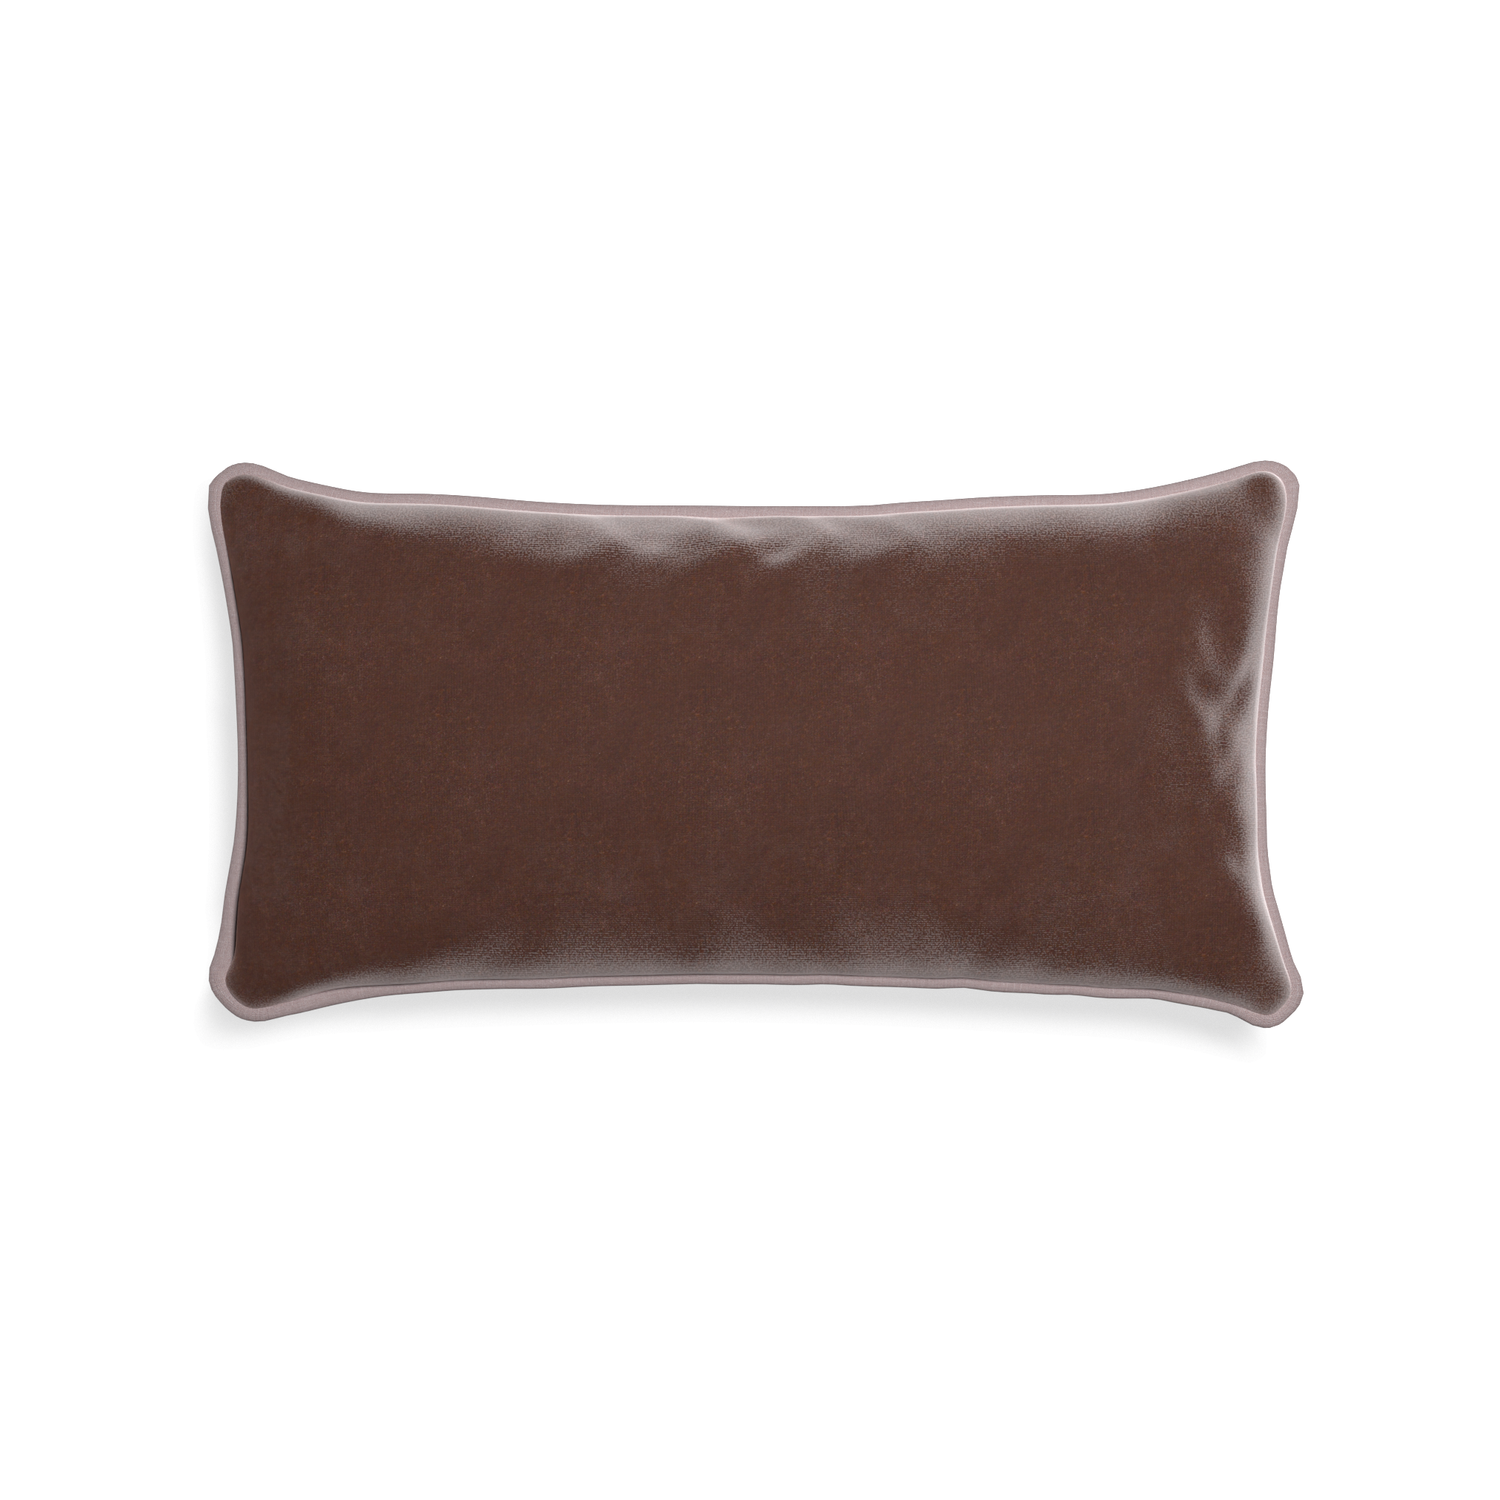 Midi-lumbar walnut velvet custom brownpillow with orchid piping on white background